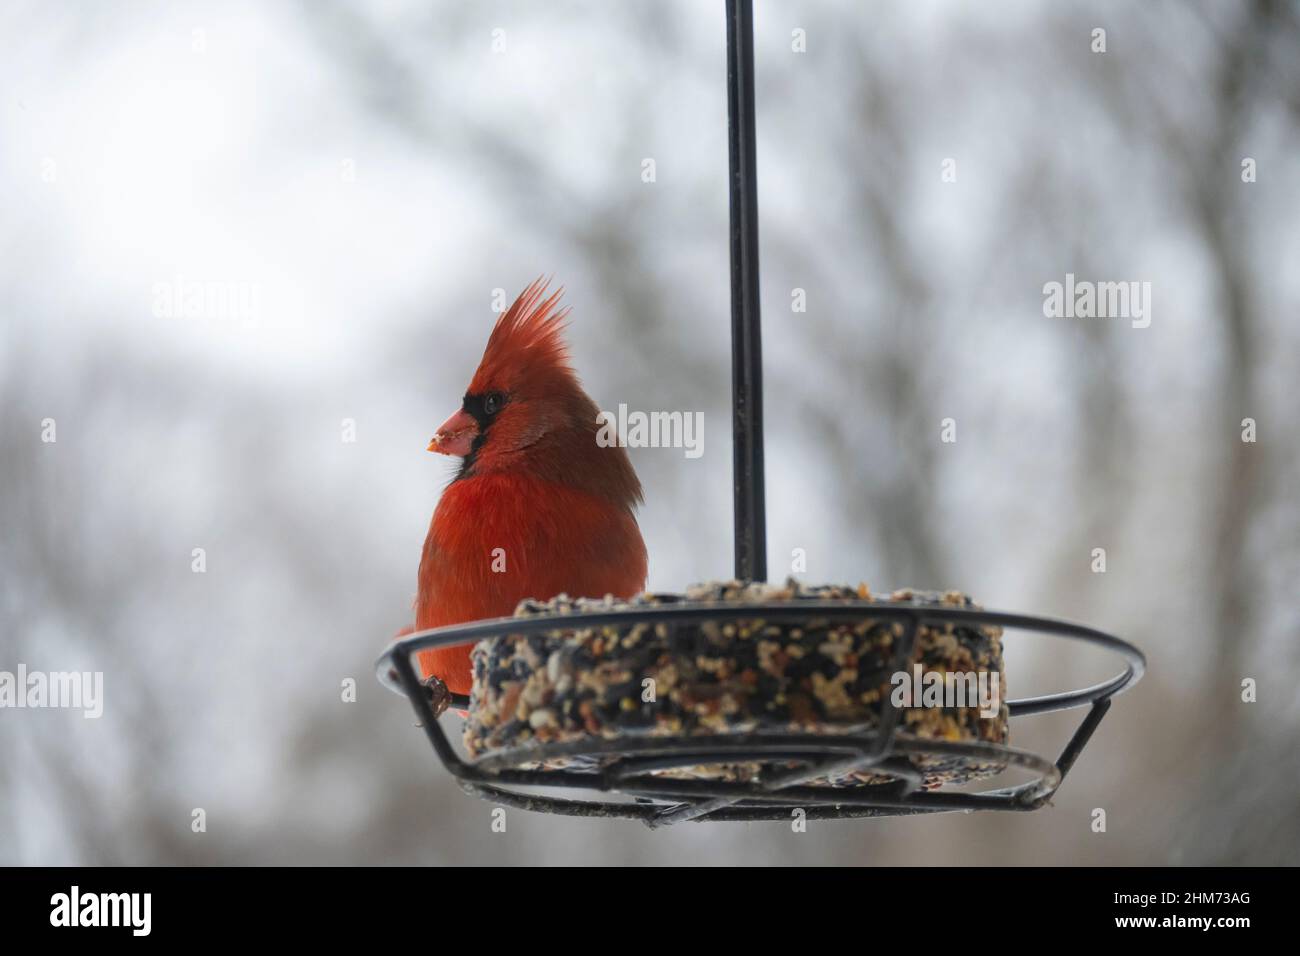 Male cardinal bird on feeder with copy space Stock Photo